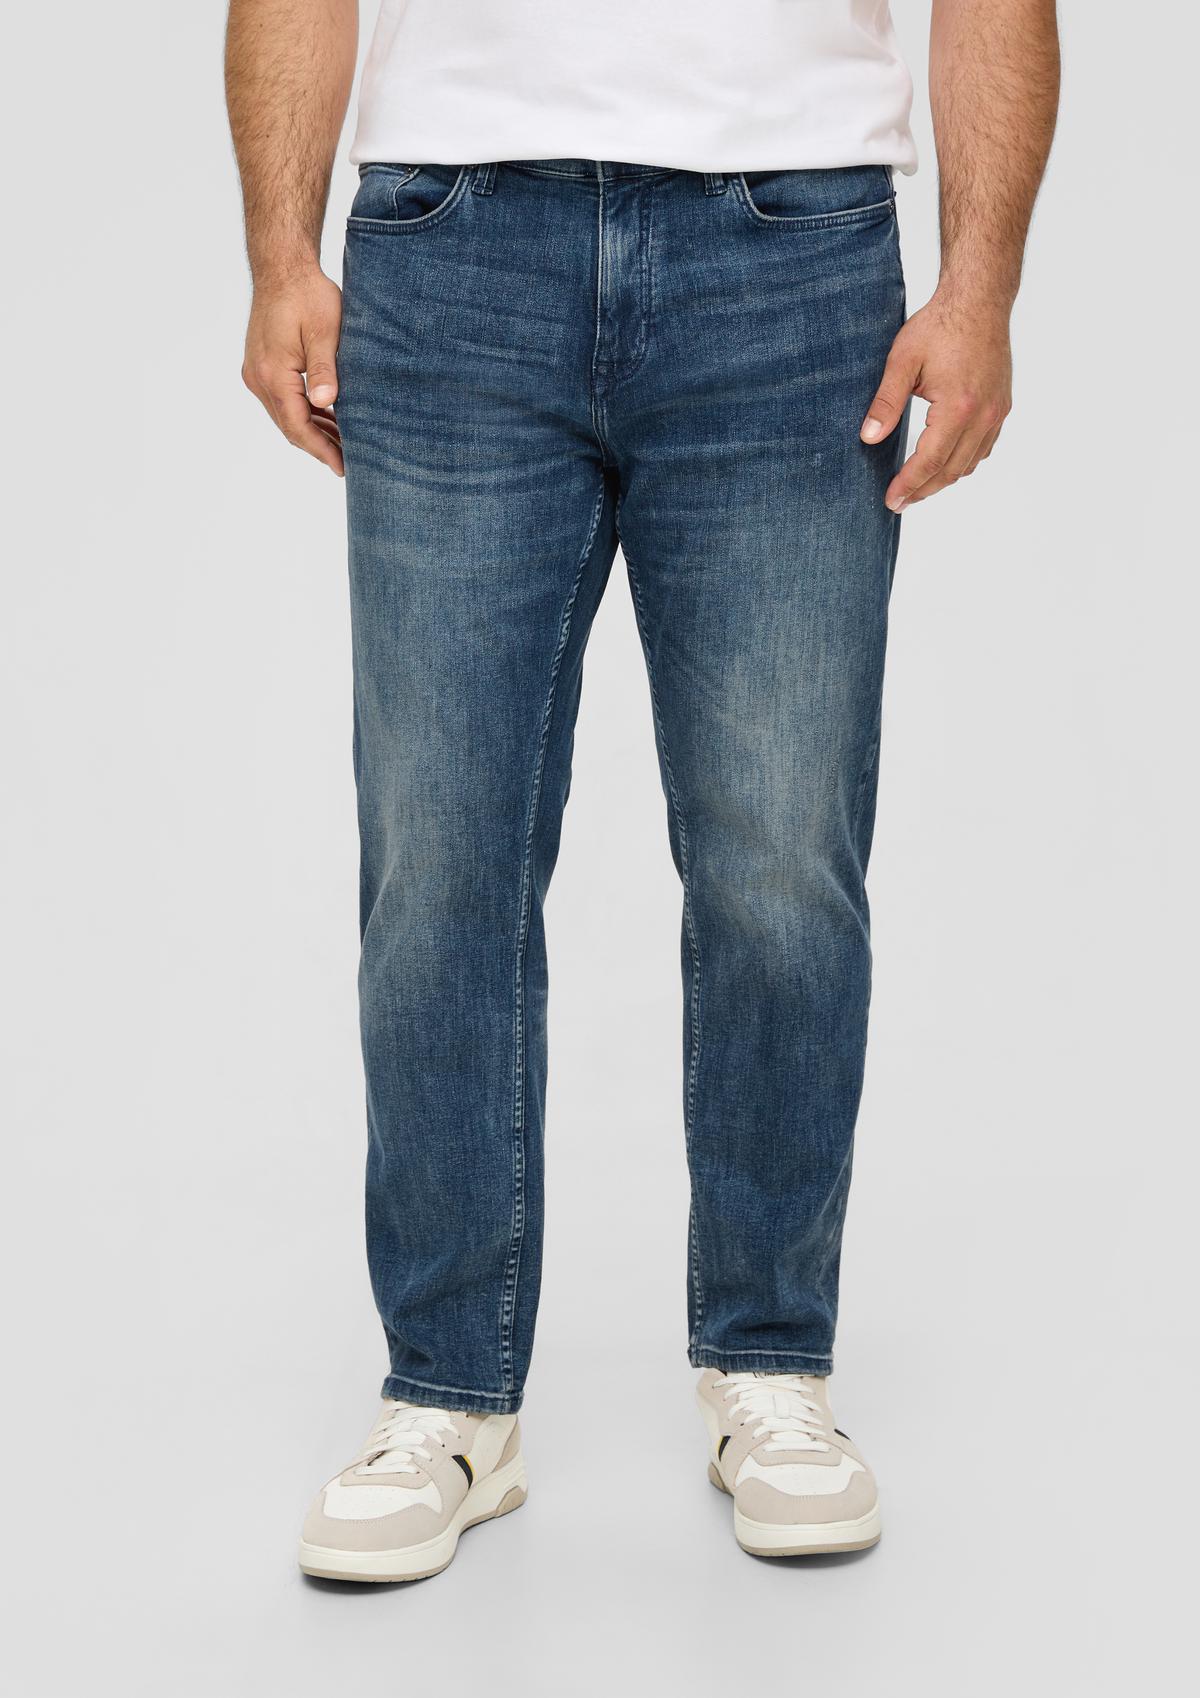 Jean Casby / Relaxed Fit / Straight Leg